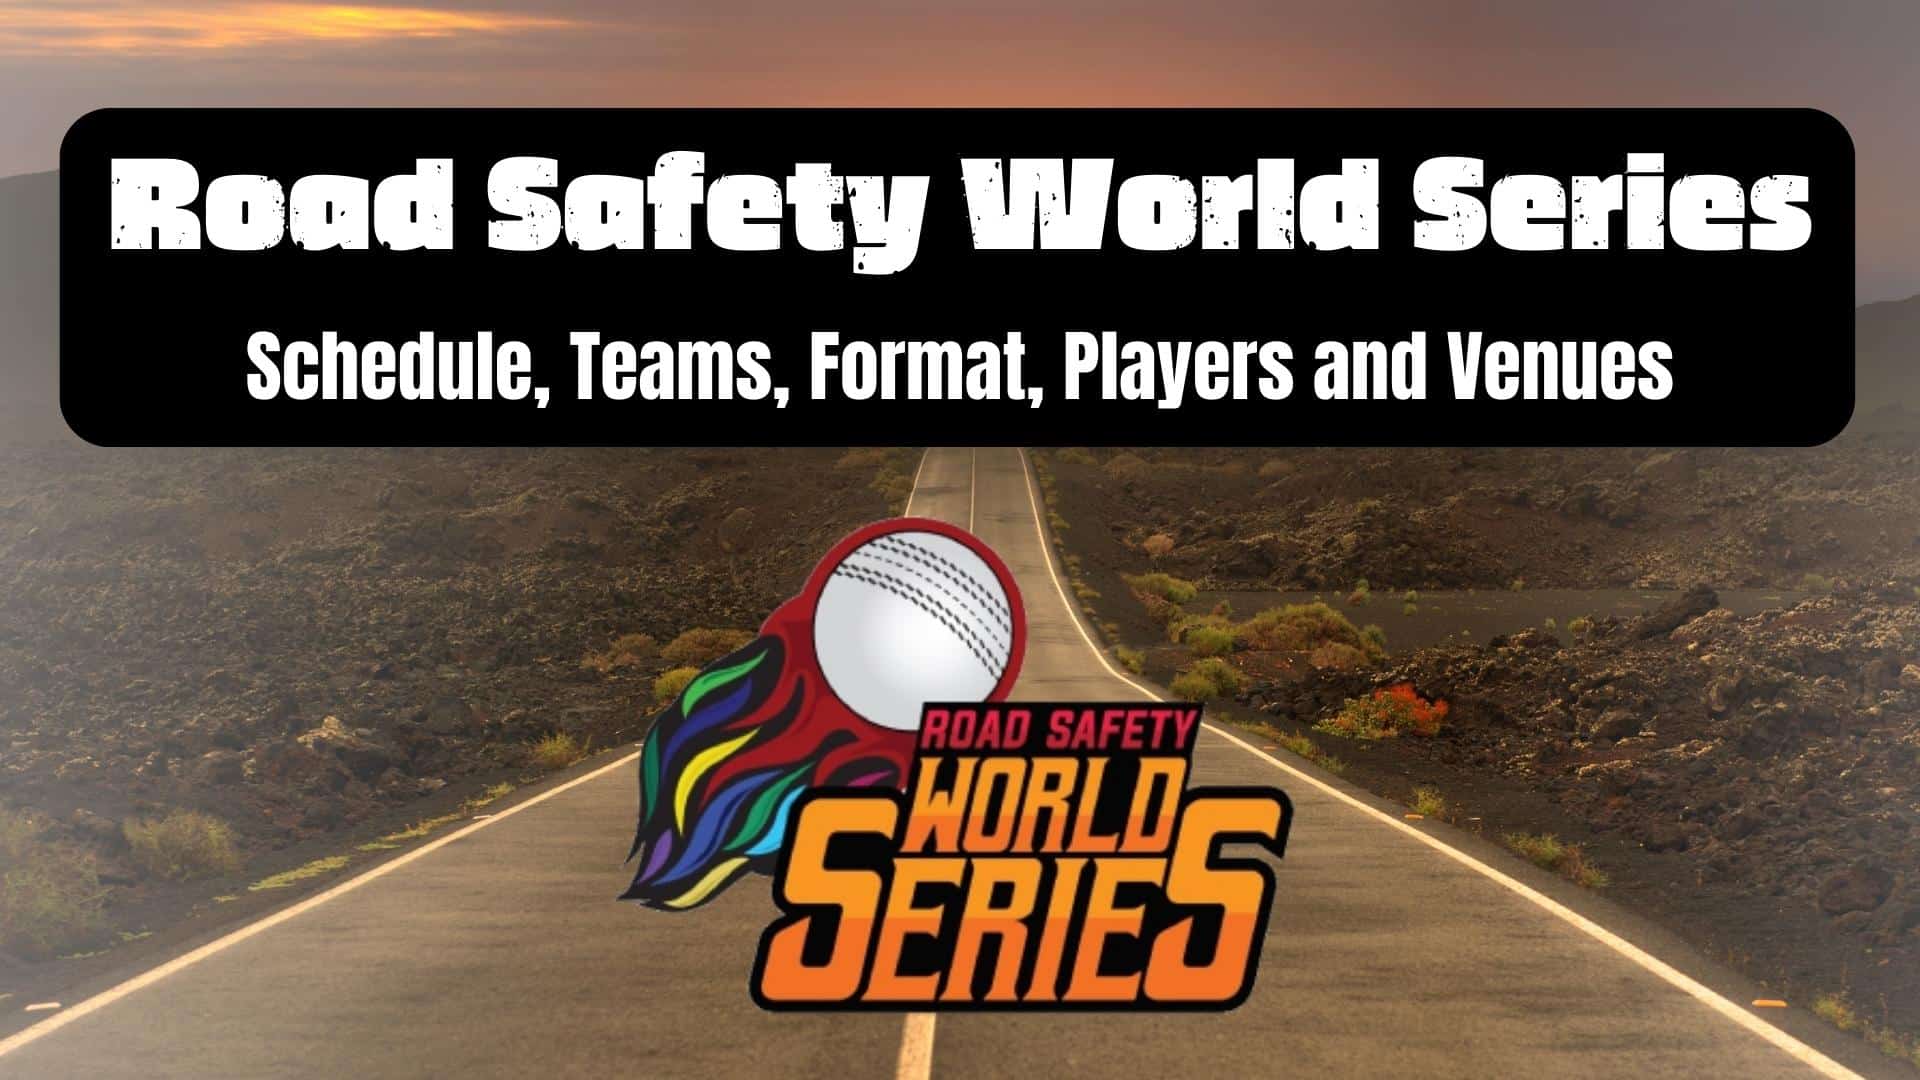 Road Safety World Series 2023 (Retired Cricketers Matches)